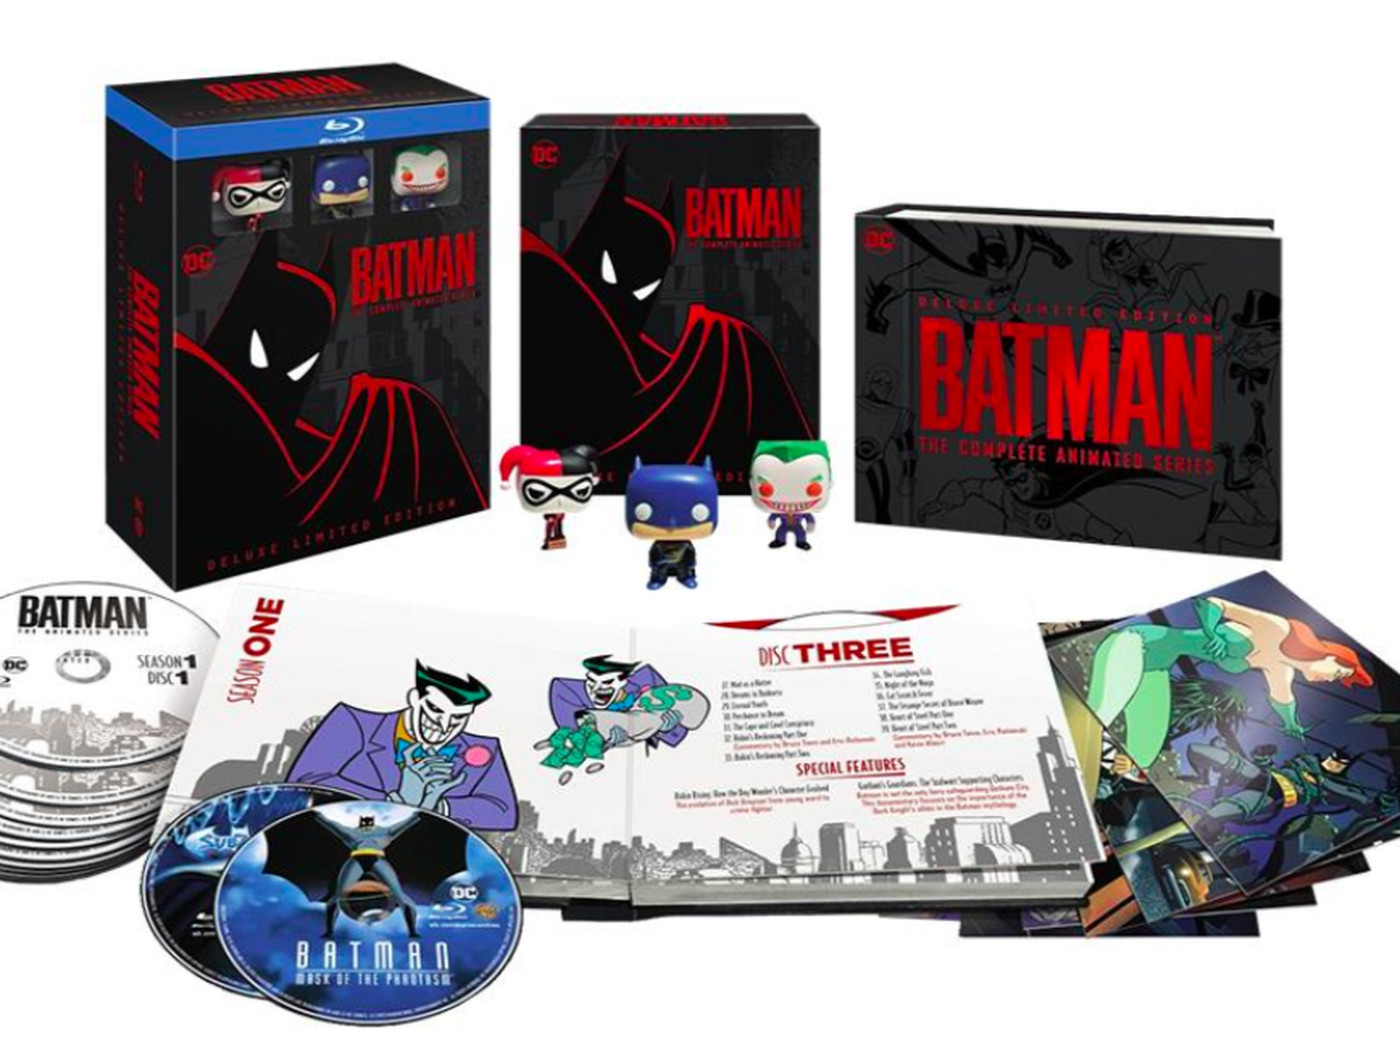 New details about Batman: The Complete Animated Series on Blu-Ray - Polygon